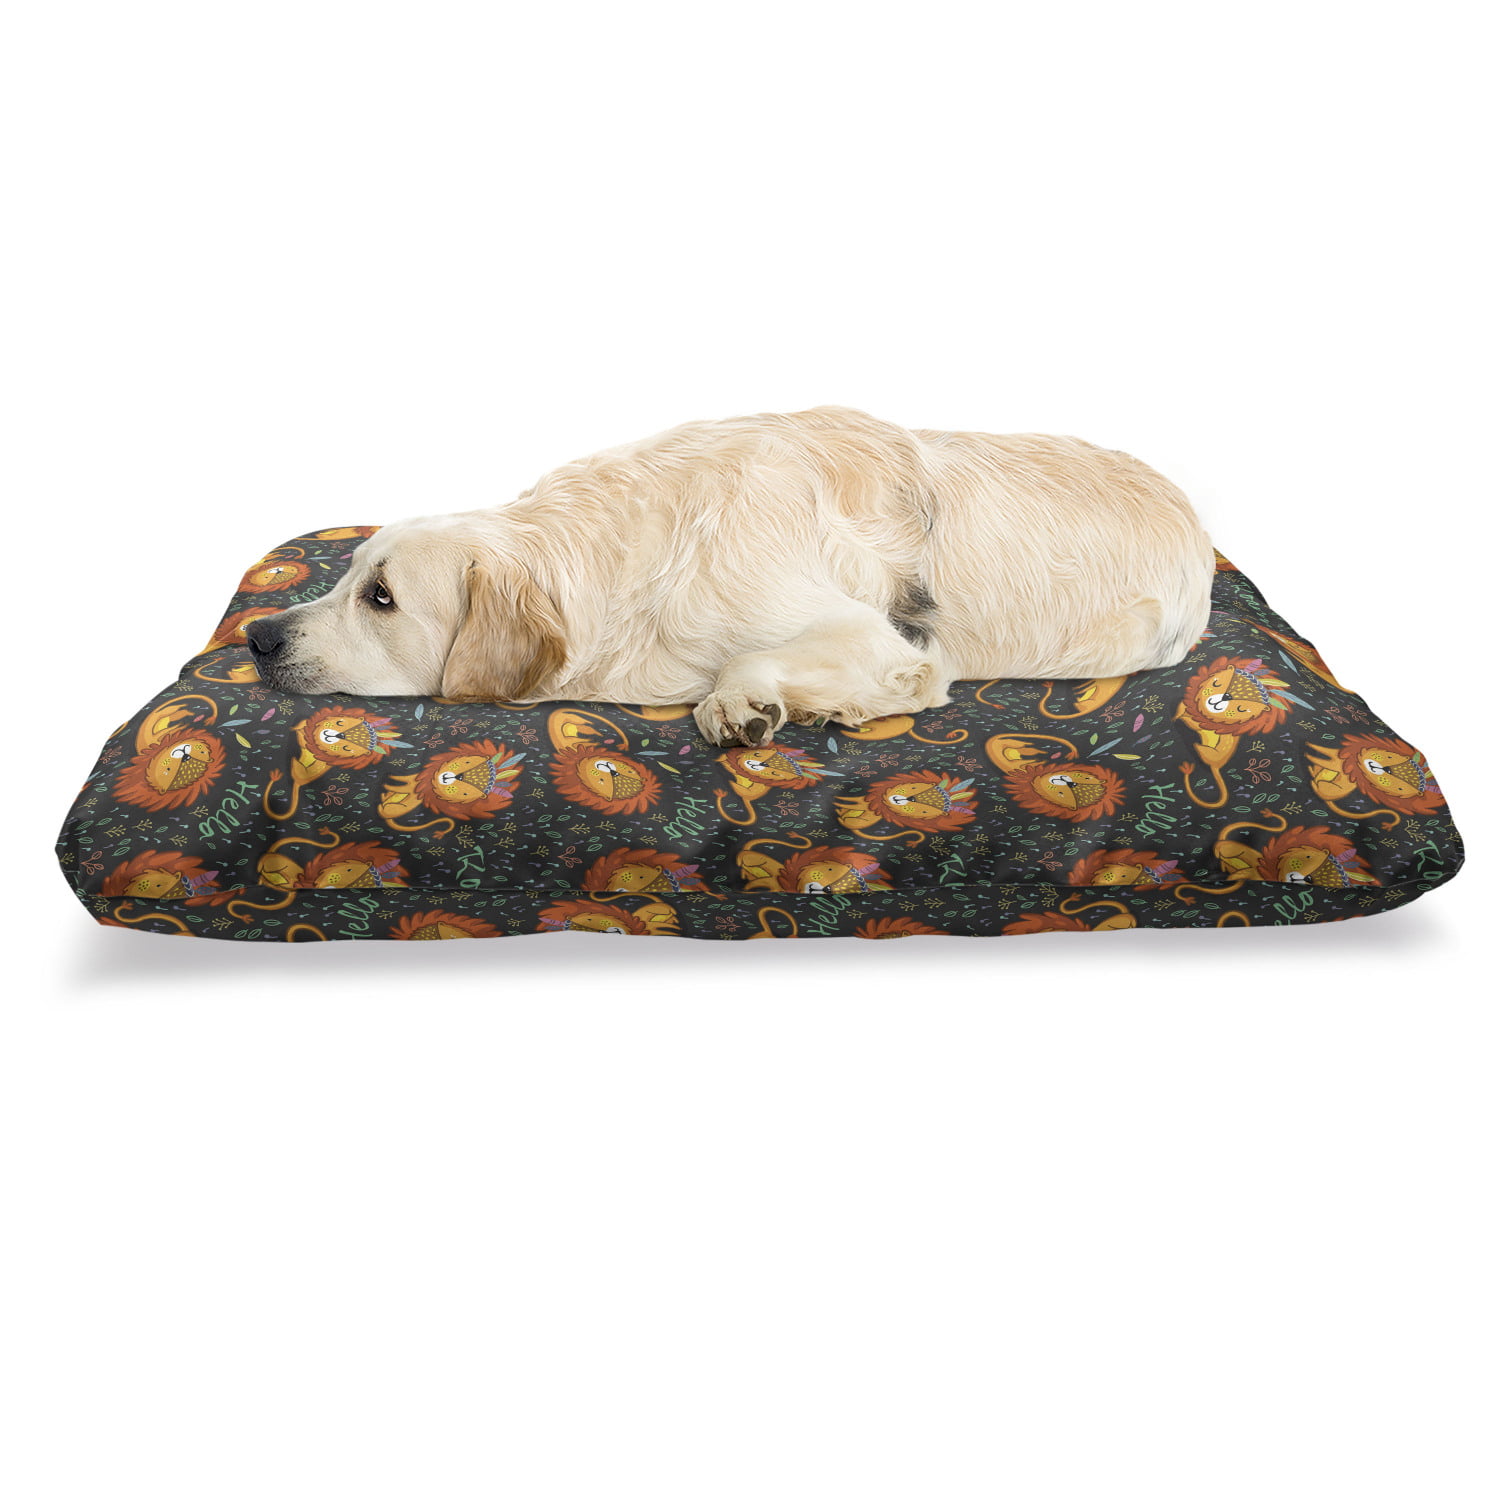 Cartoon Pet Bed Lions Ilrations In, King Bed With Dog Insert